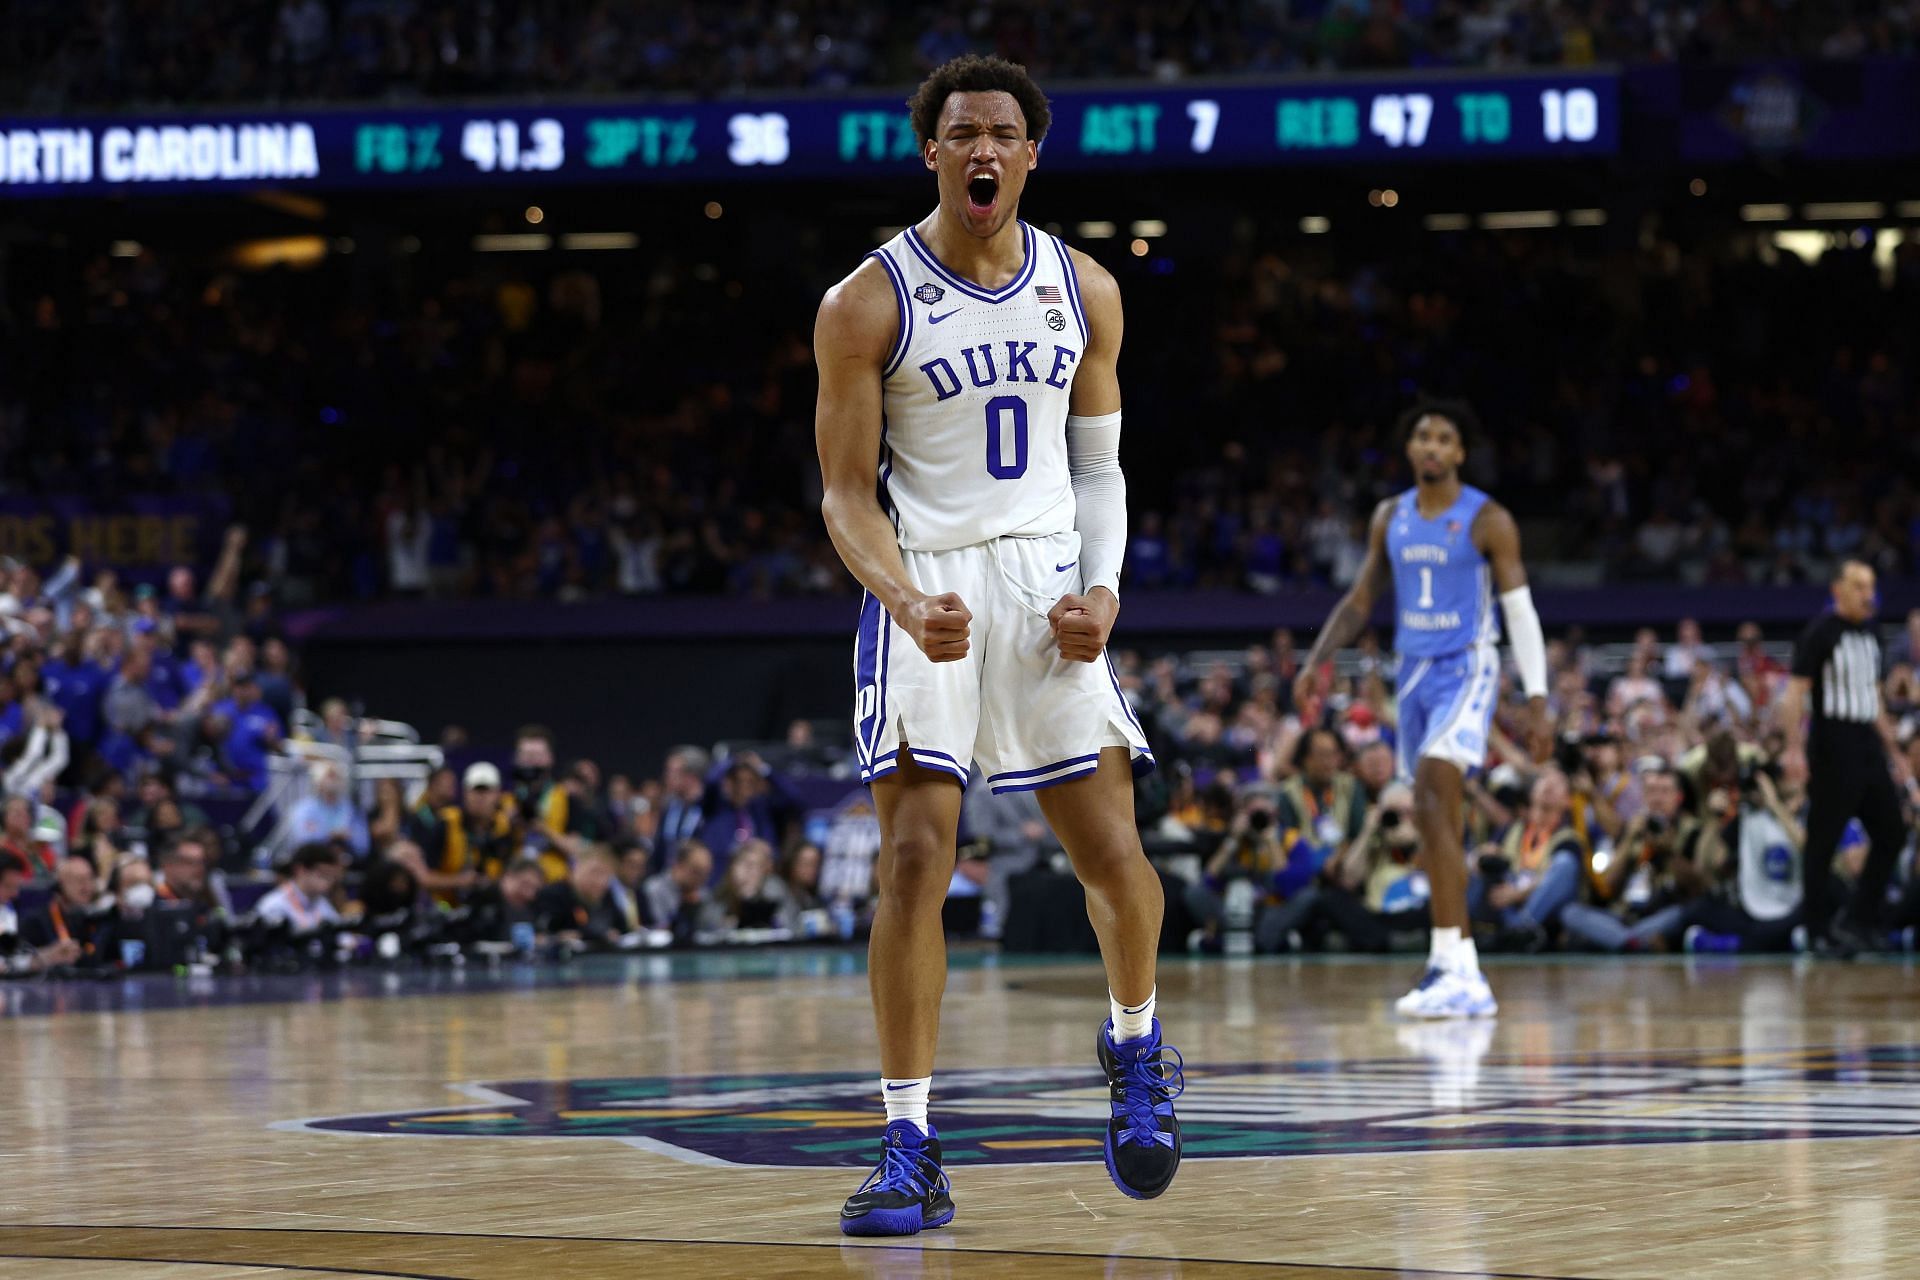 Wendell Moore aims to turn a solid March Madness performance into a first-round selection.